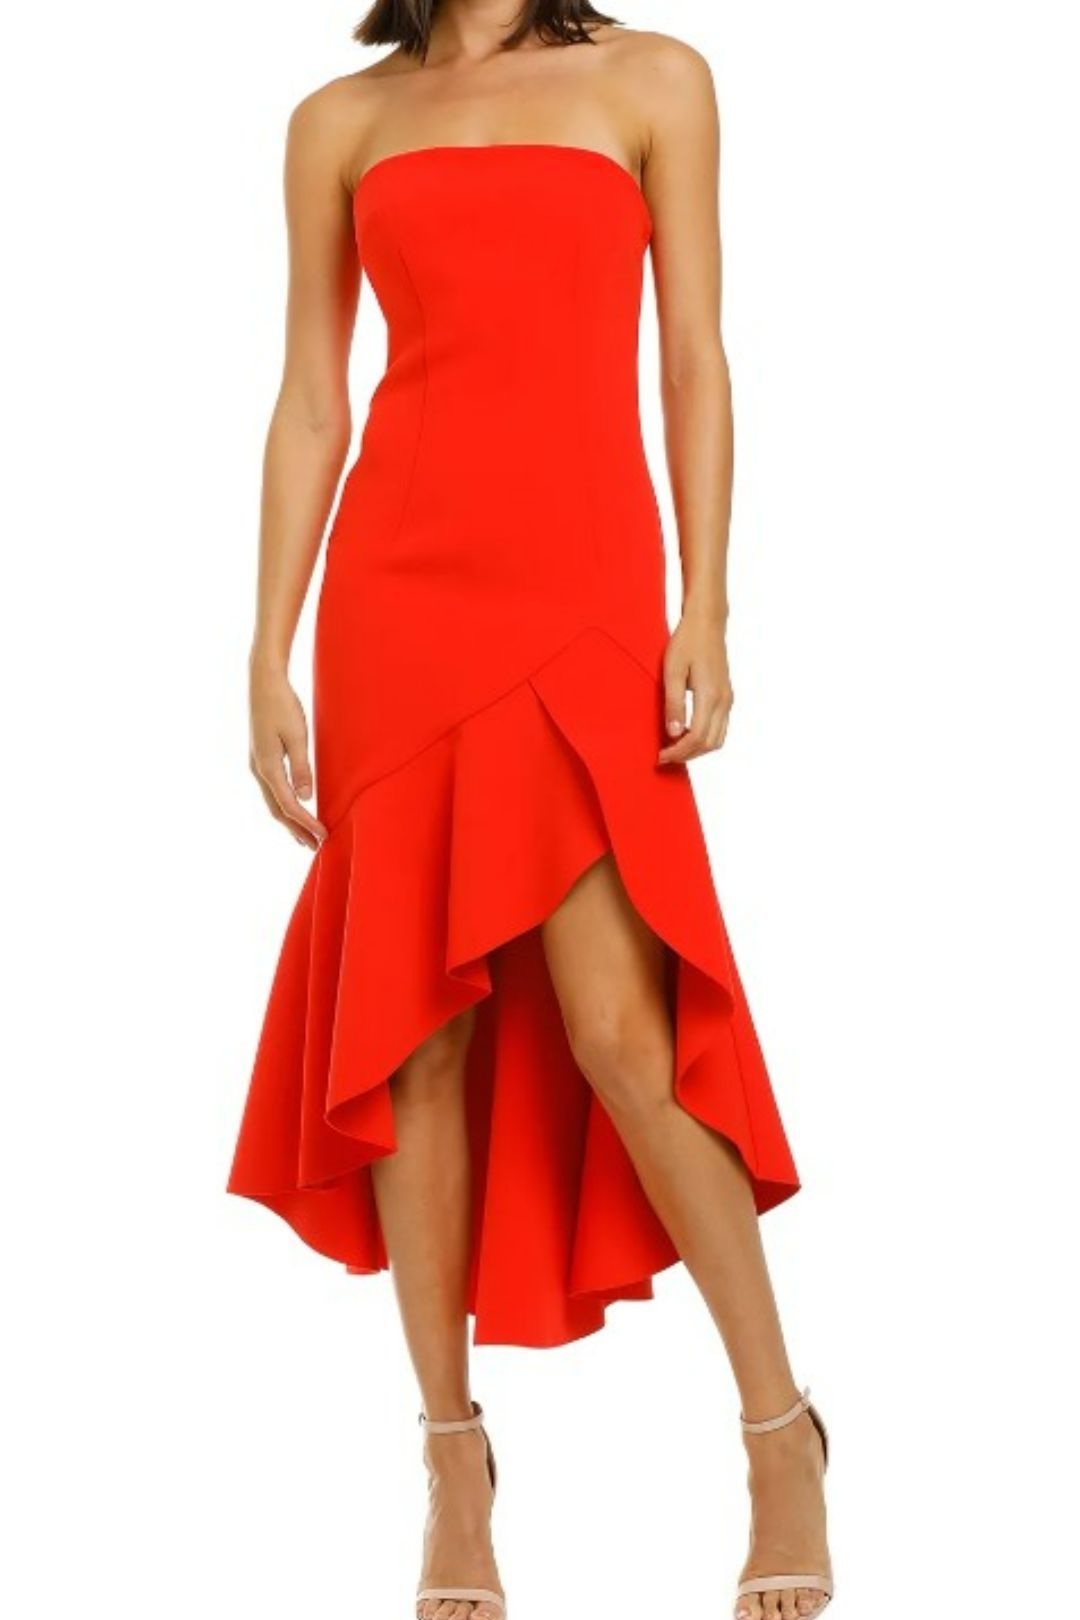 By Johnny - Coral Strapless Midi Dress